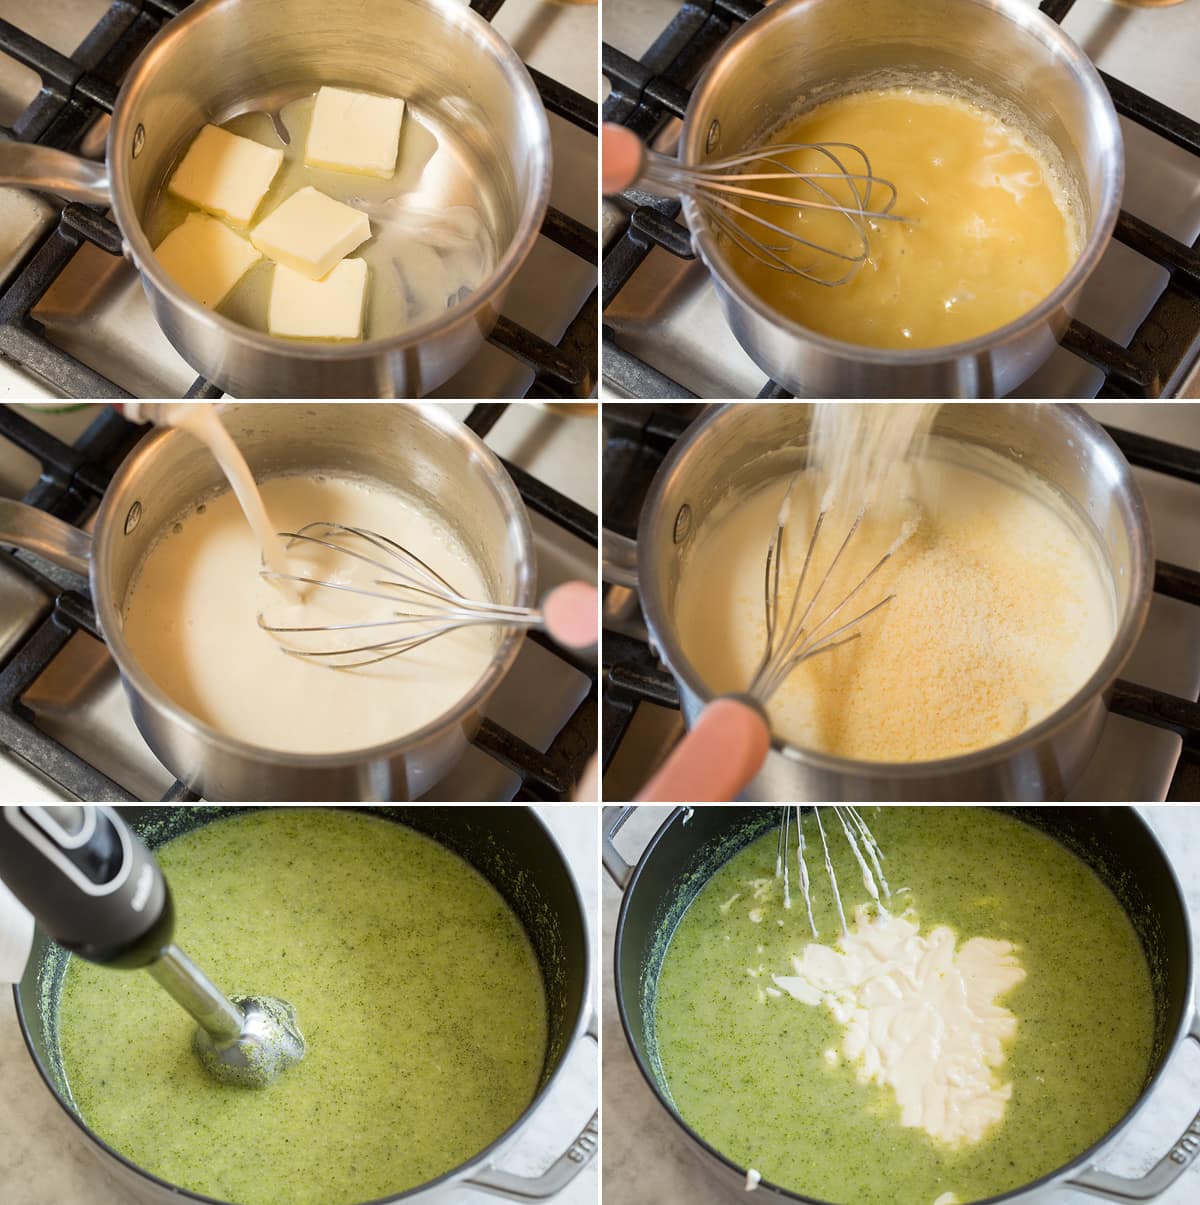 Steps of making white sauce in saucepan for cream of broccoli soup and adding to broccoli mixture in pot,